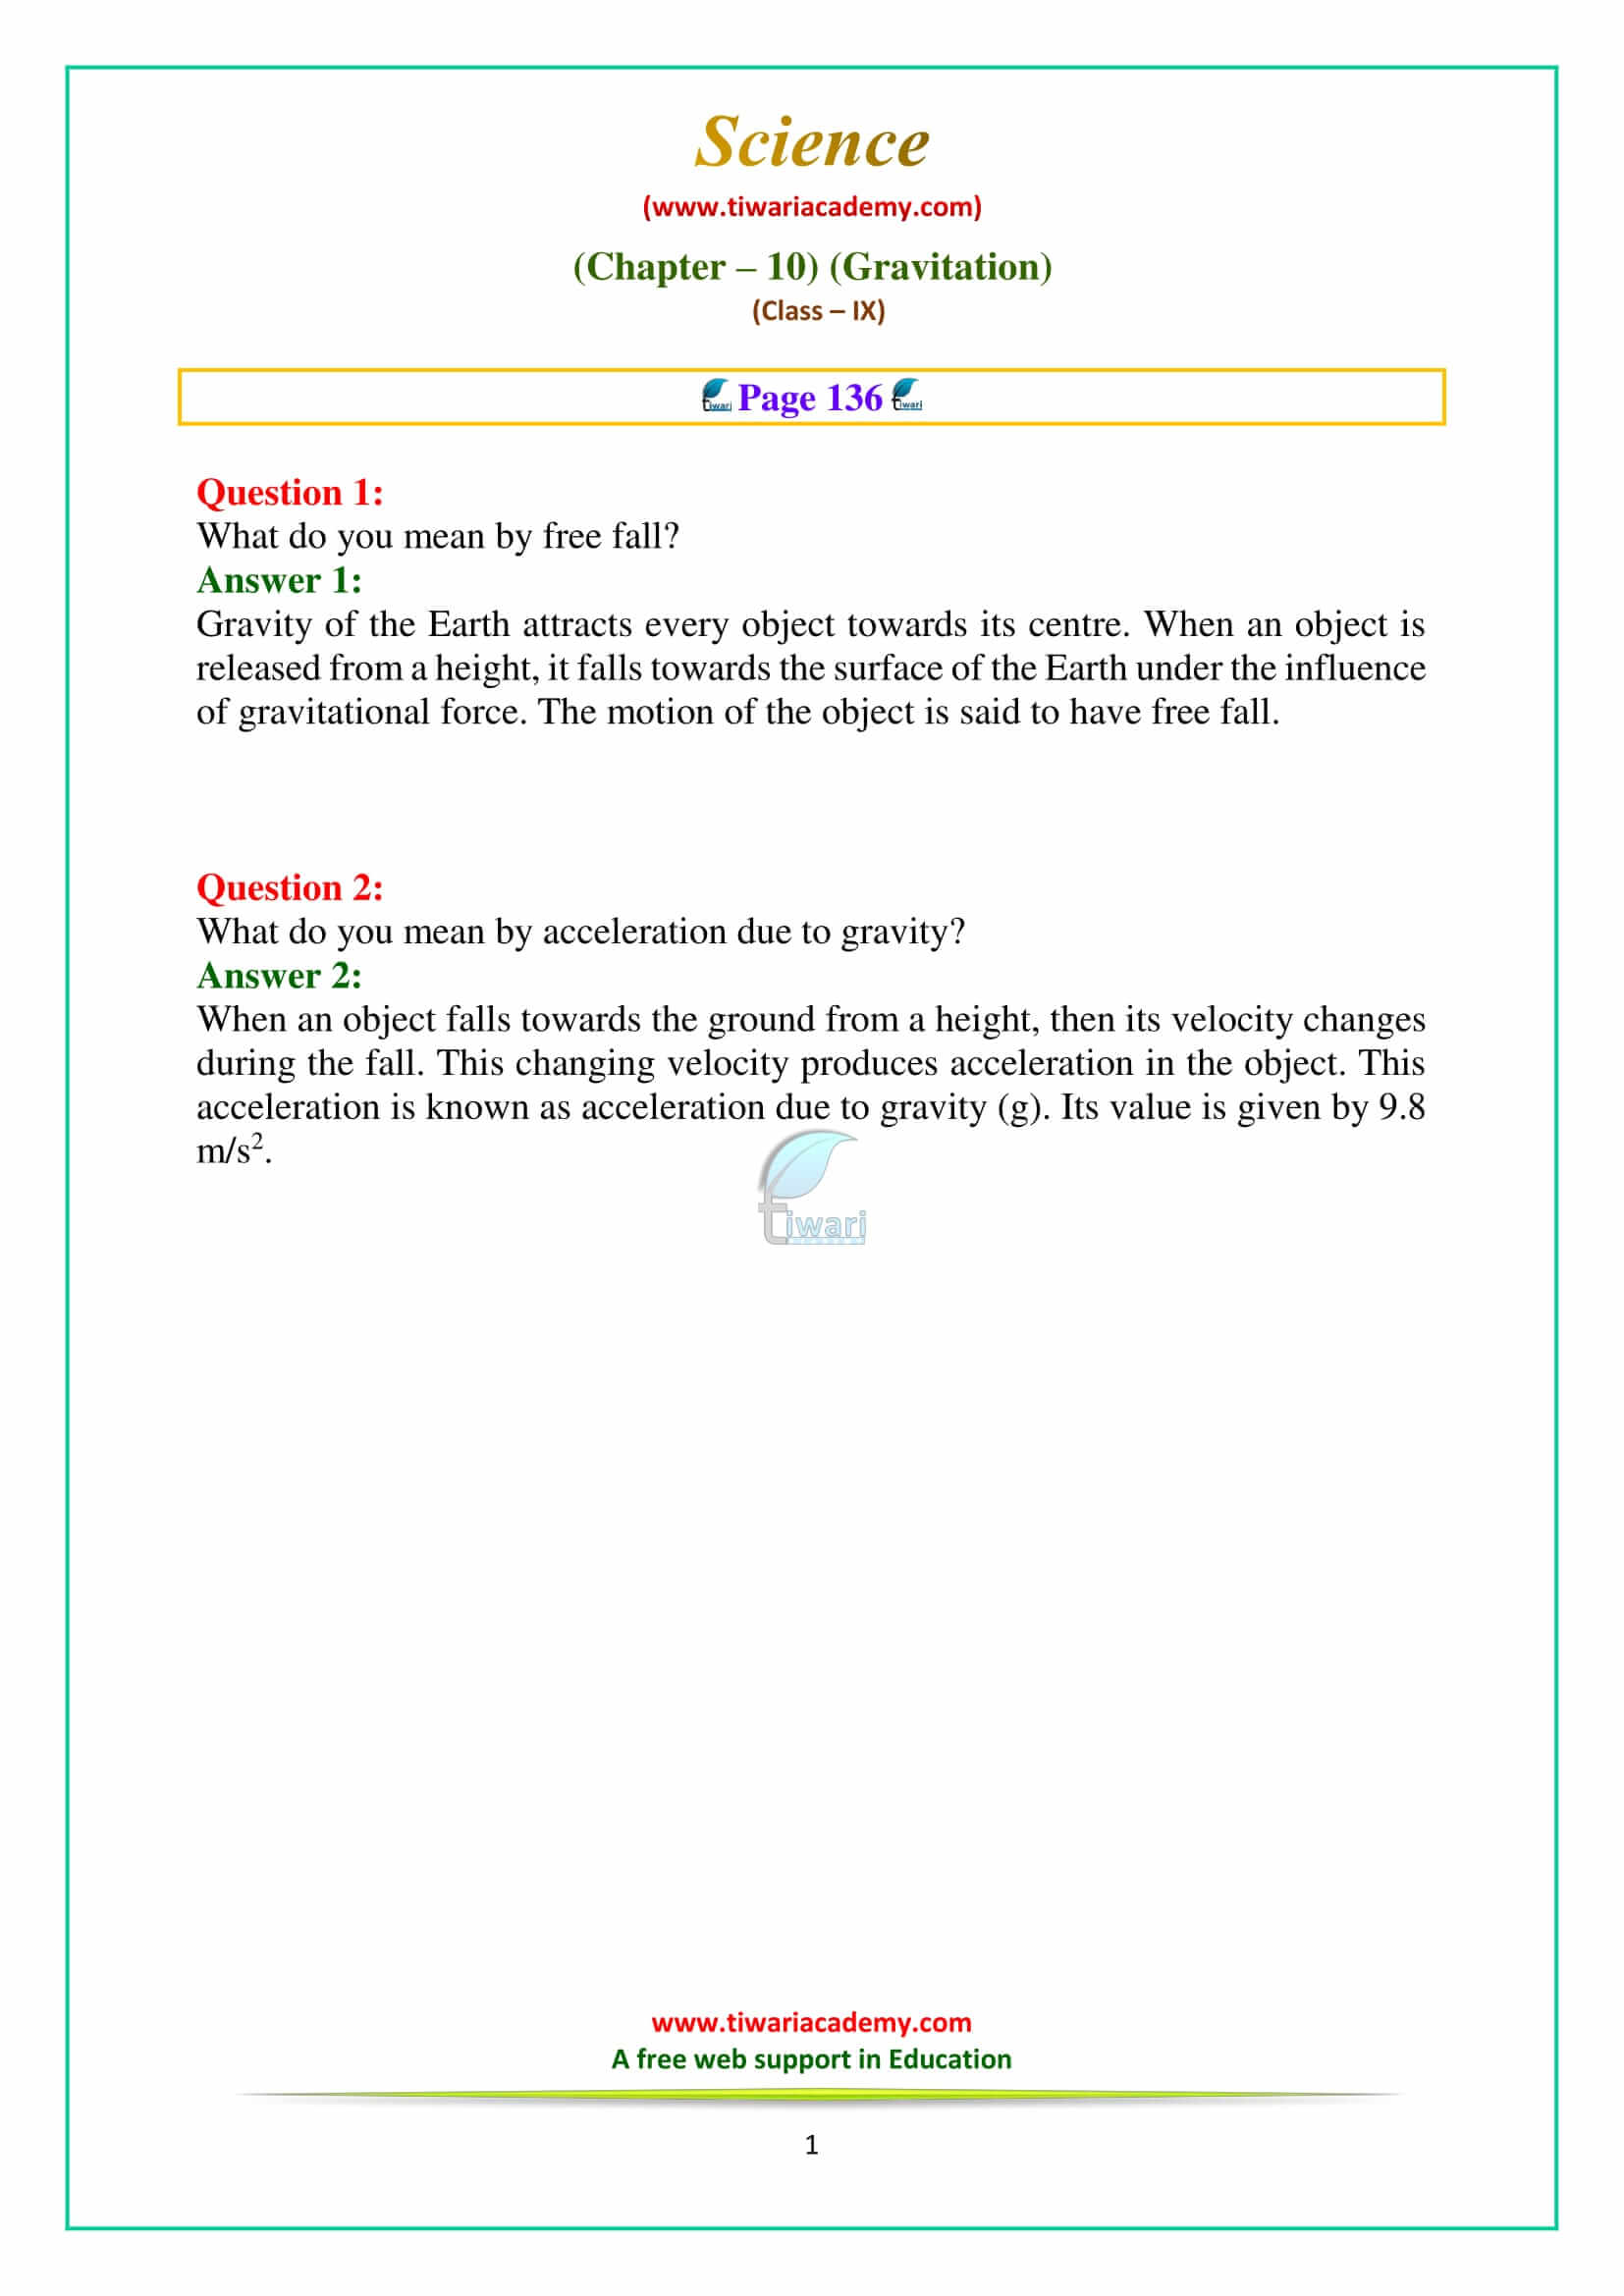 NCERT Solutions Class 9 Science Chapter 10 Gravitation Intext Questions on page 136